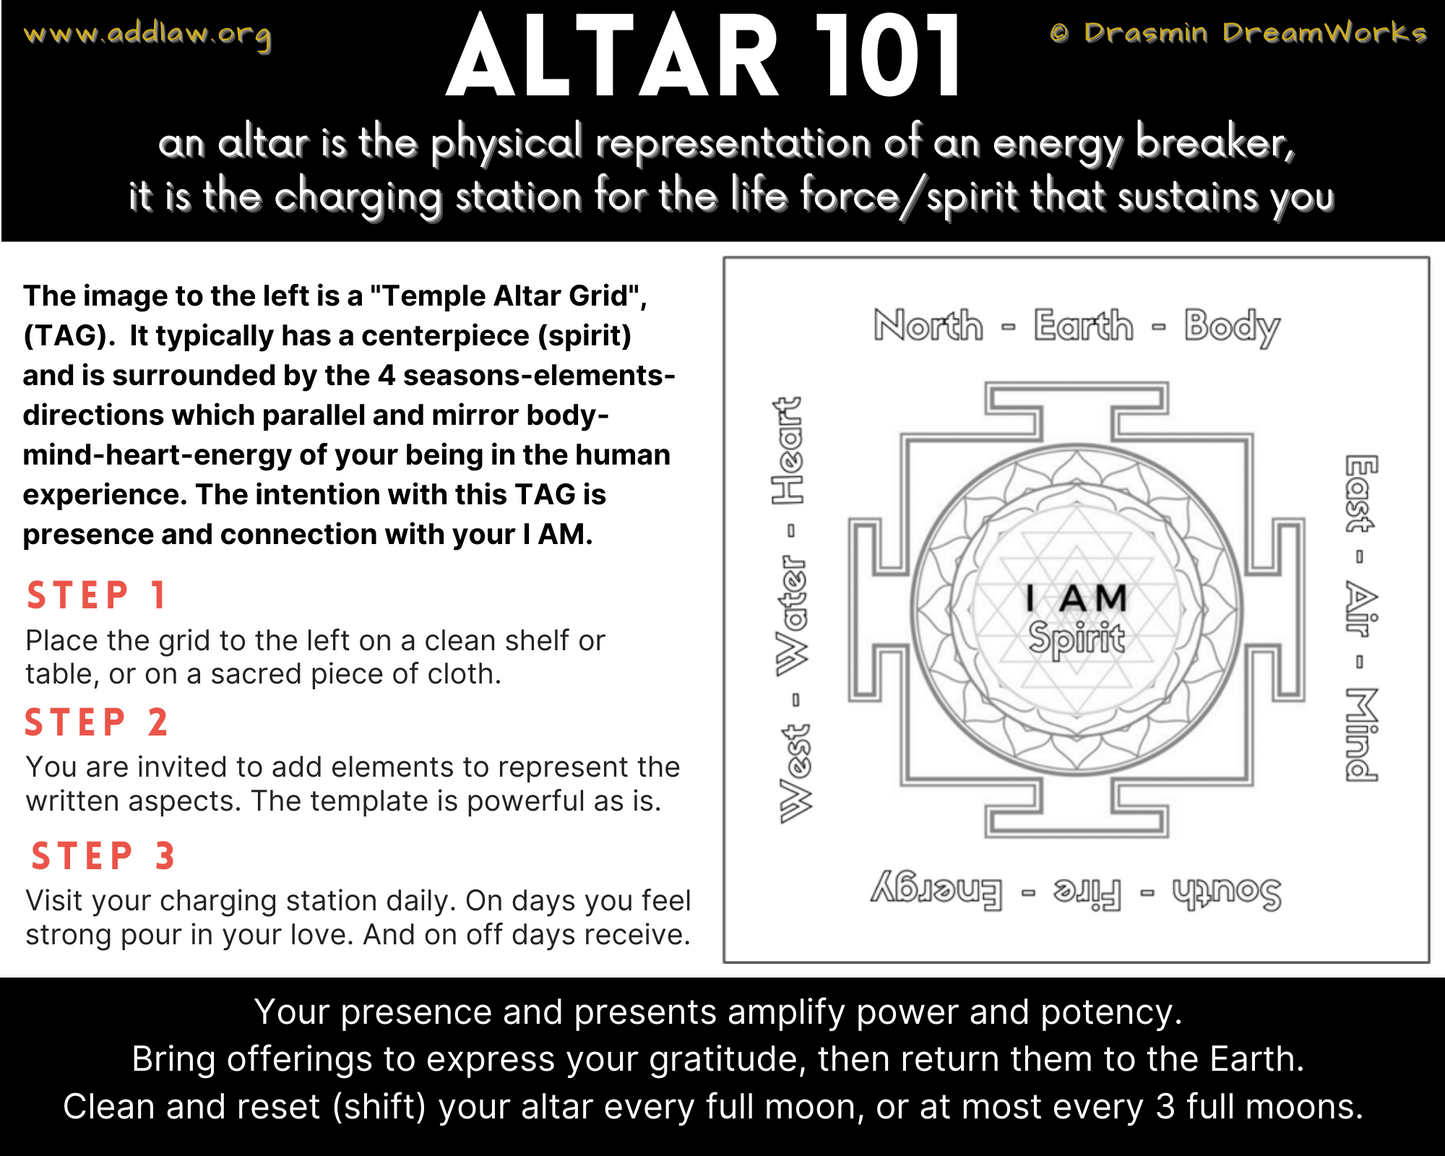 Altar 101 - what, how, why